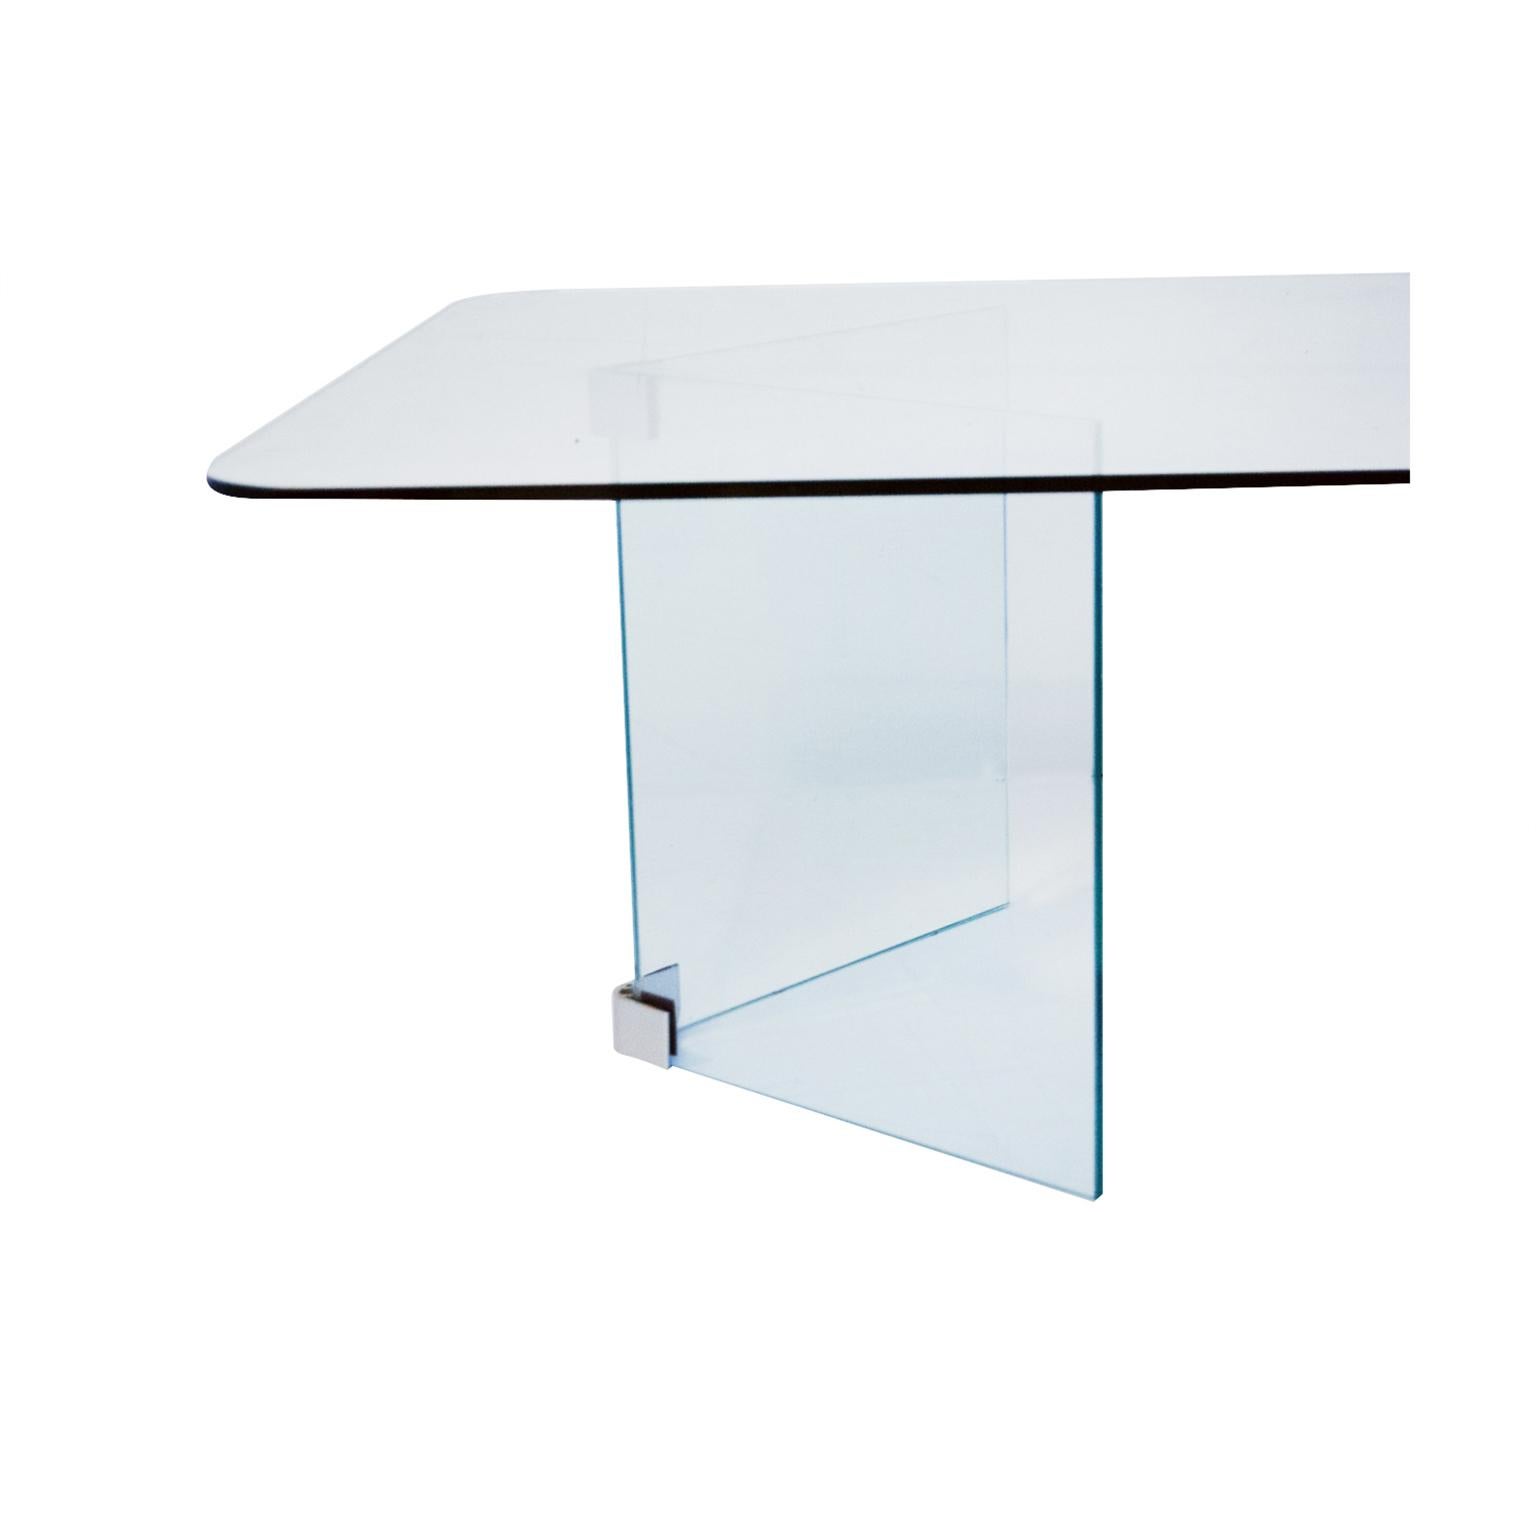 The plated metal fittings forming corner joints between two pieces of glass, with two supports at right angles for the to glass. Pace were the only company to make this type and style of table with right angles of metal with Allen screws to gently